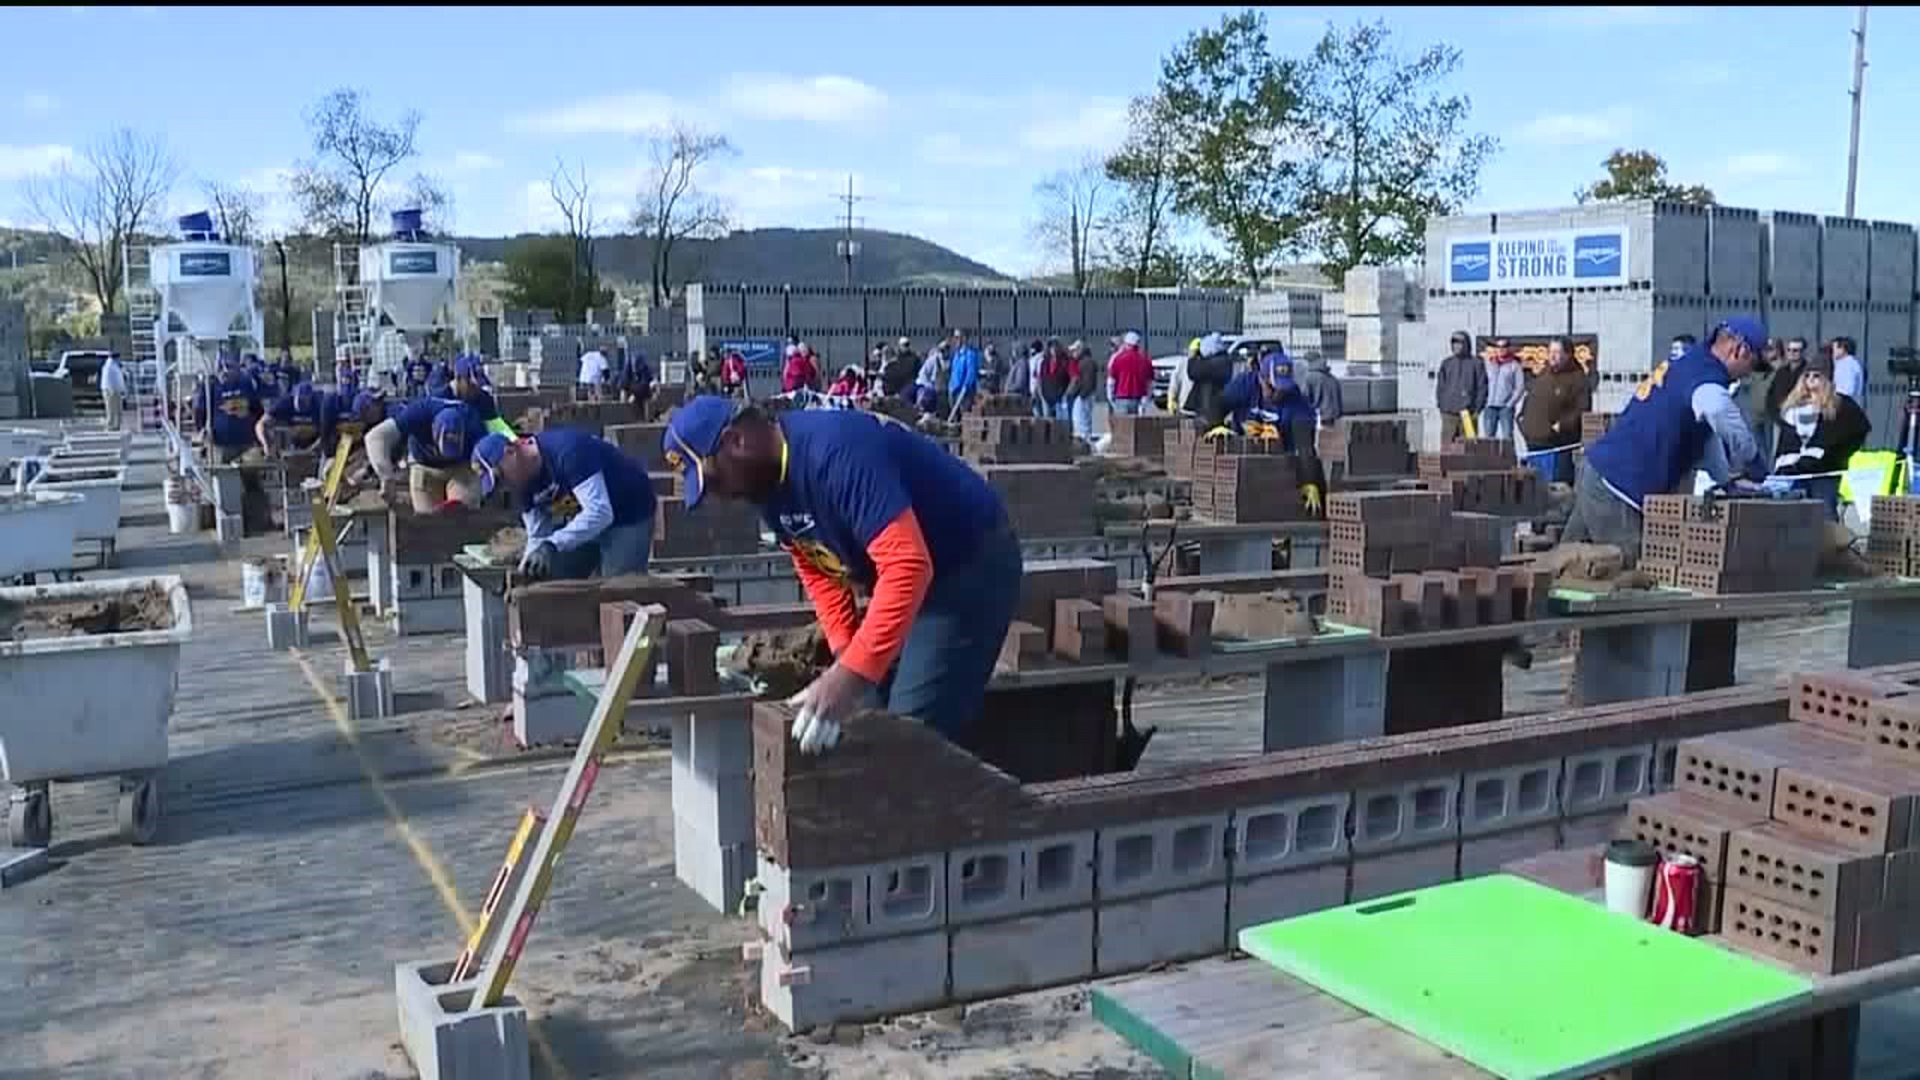 Competing in the Bricklayer 500 in Bradford County